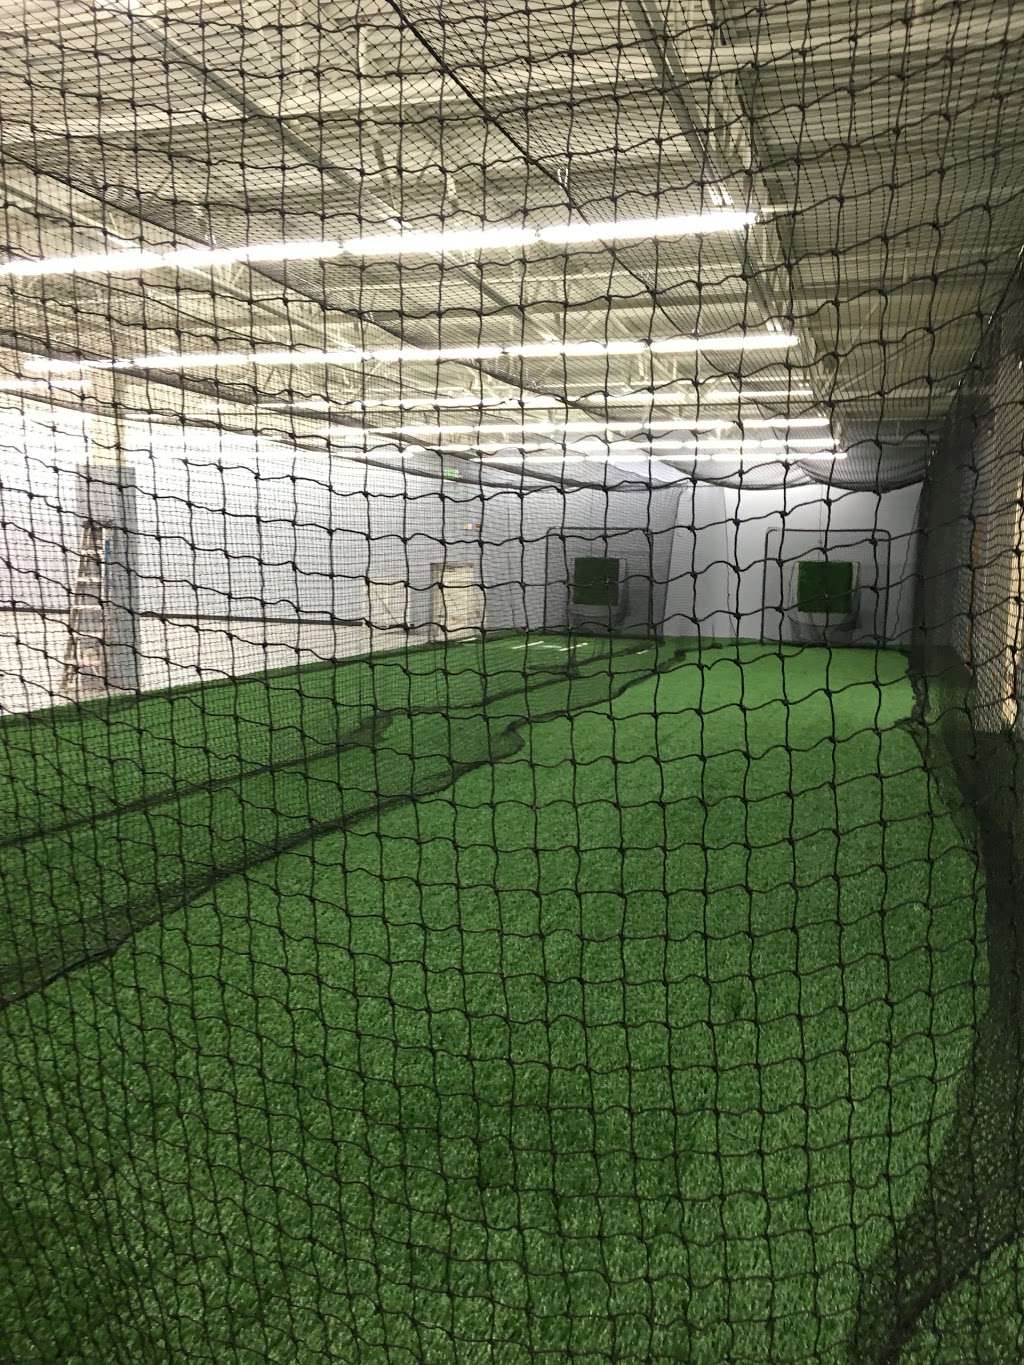 Parisi Speed School at Elite Prospect Athletic Complex | 10900 Gilroy Rd Unit L, Hunt Valley, MD 21031, USA | Phone: (410) 329-1400